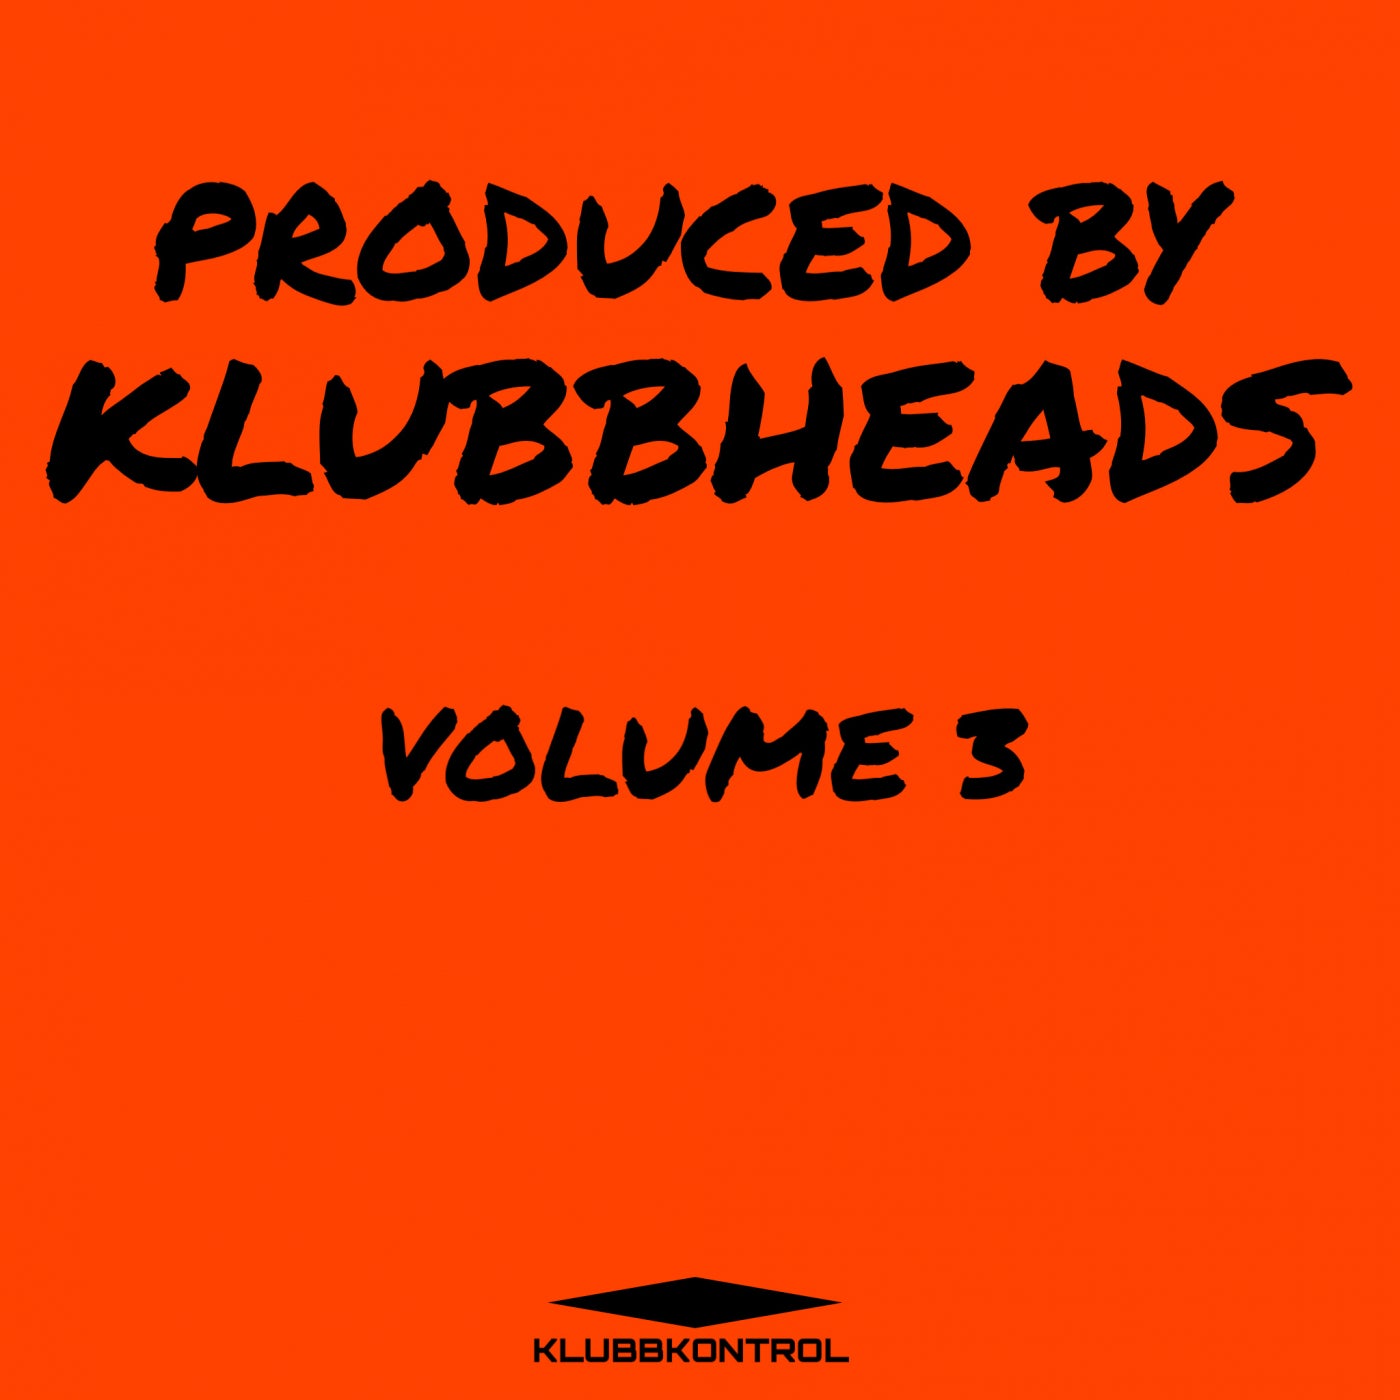 Produced by Klubbheads - Volume 3